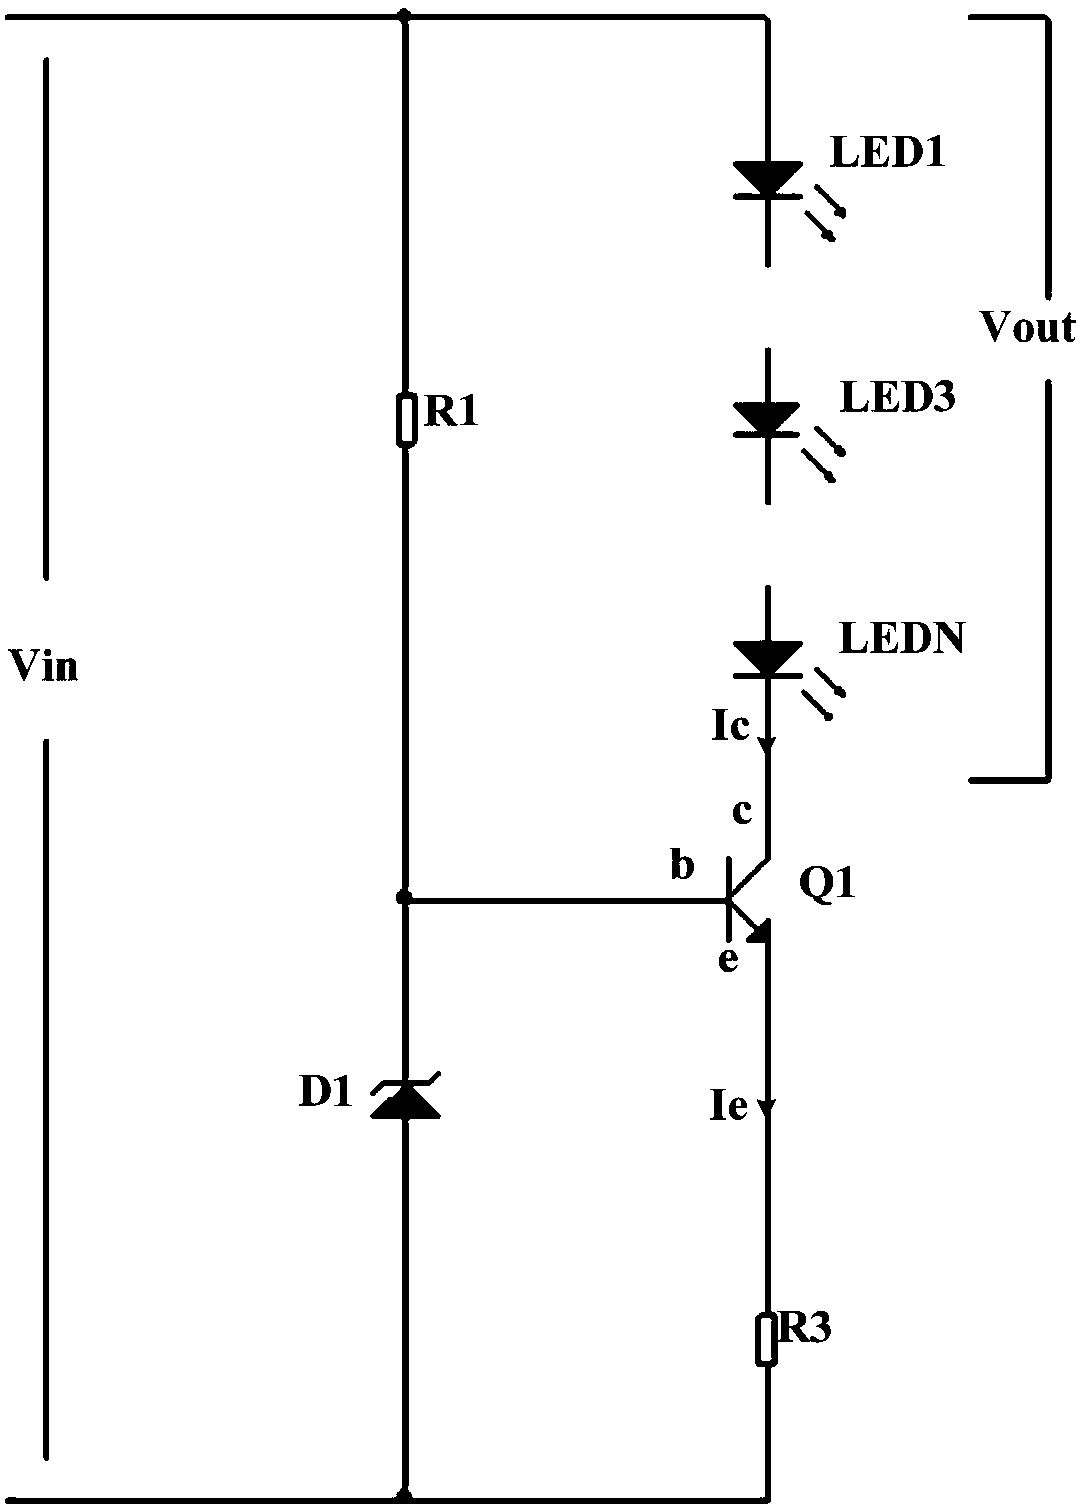 Linear constant current circuit for overvoltage protection